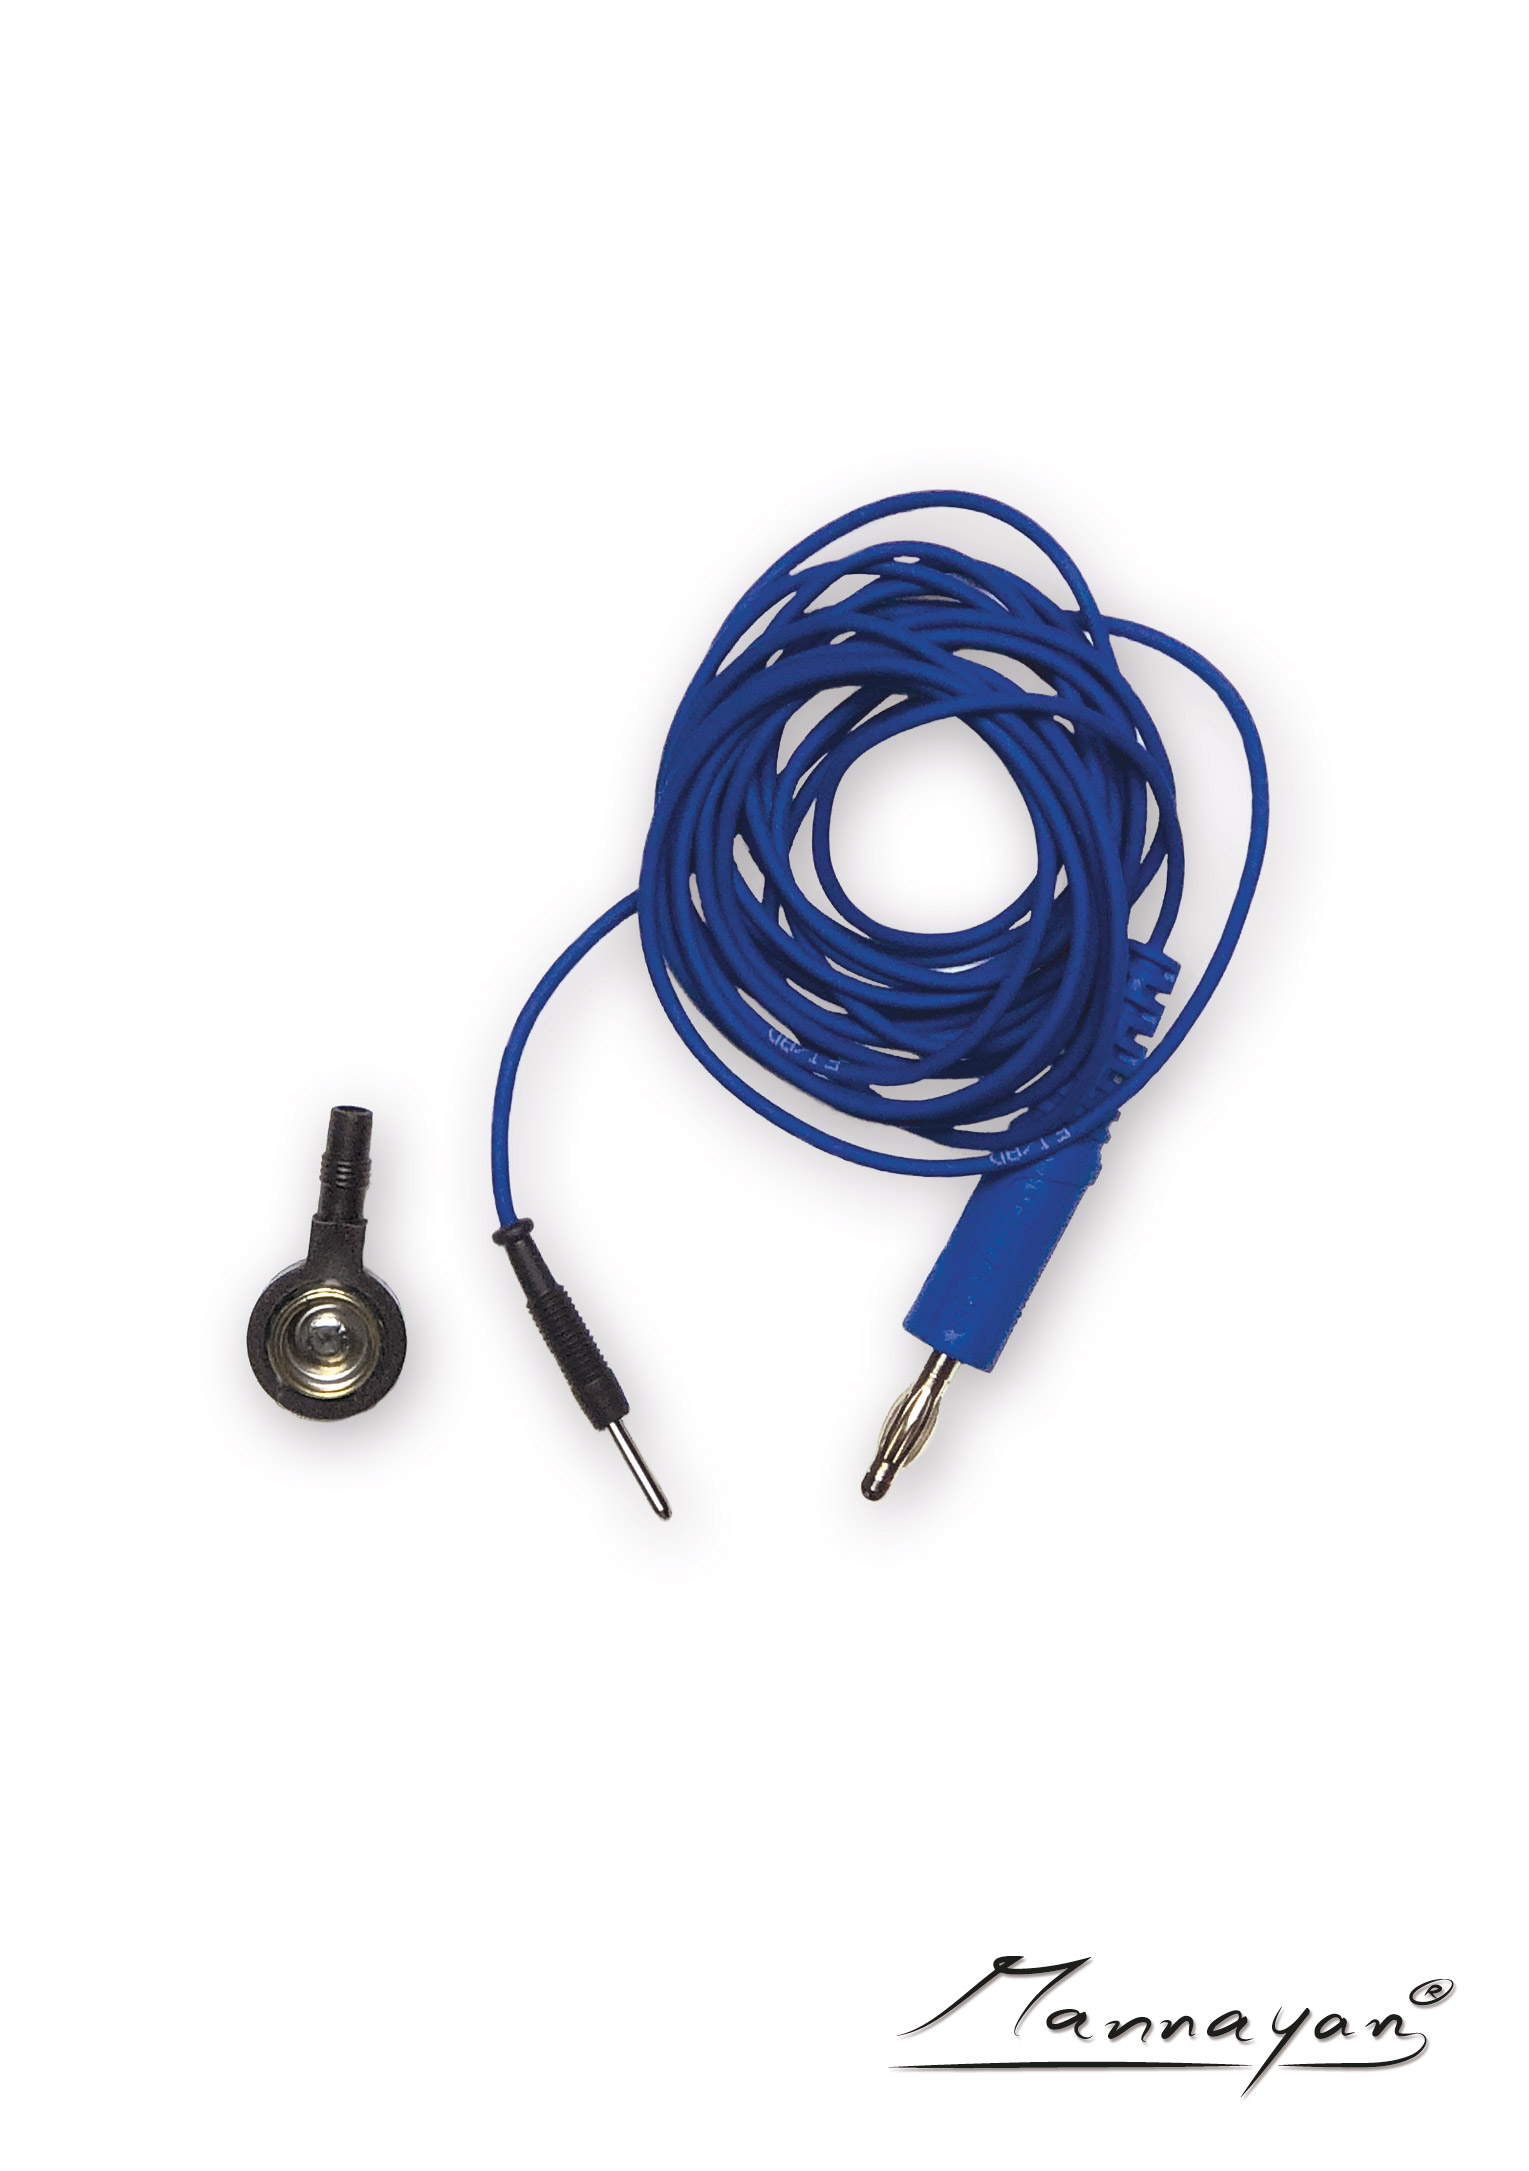 Cable (2,5 m) with connector adapter for textile surface electrodes (blue)